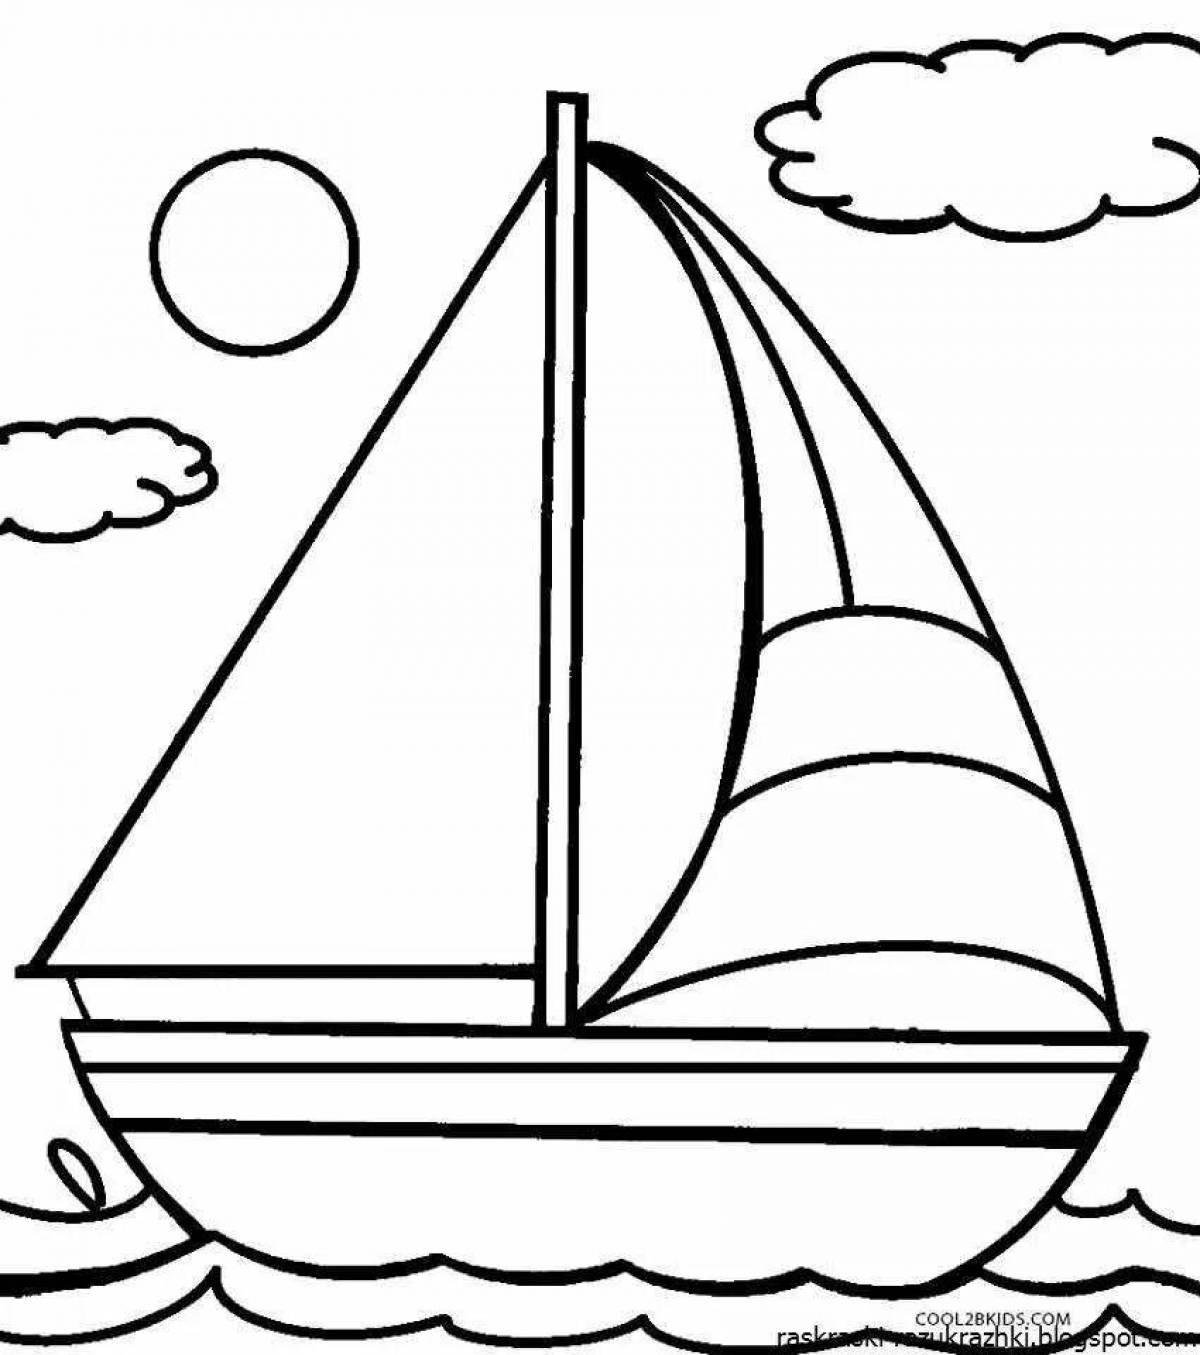 Fabulous ship coloring page for kids